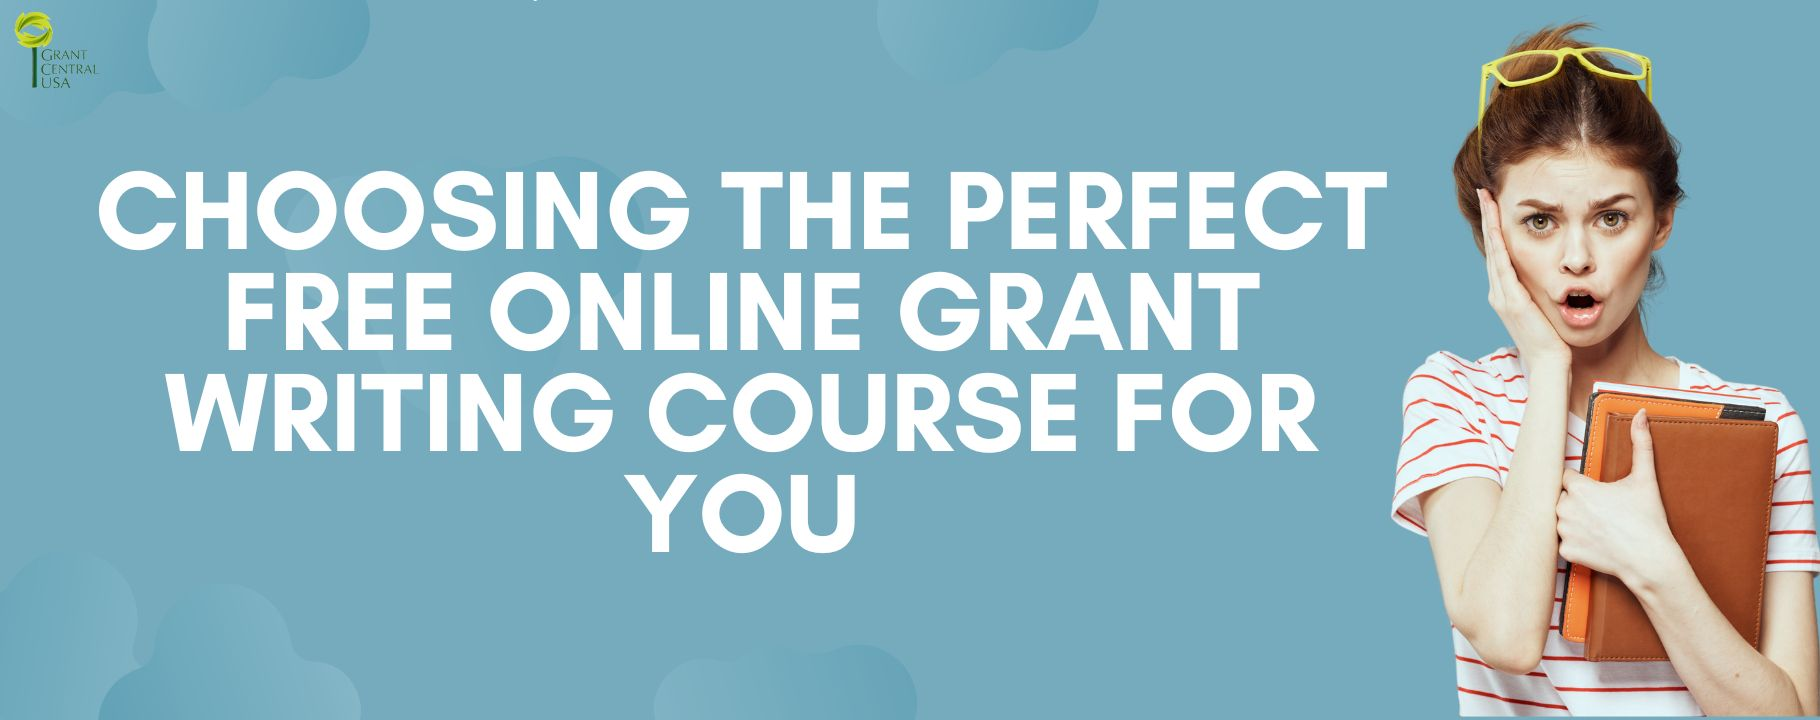 Grant Writer who is confused and trying to pick the right free online writing course